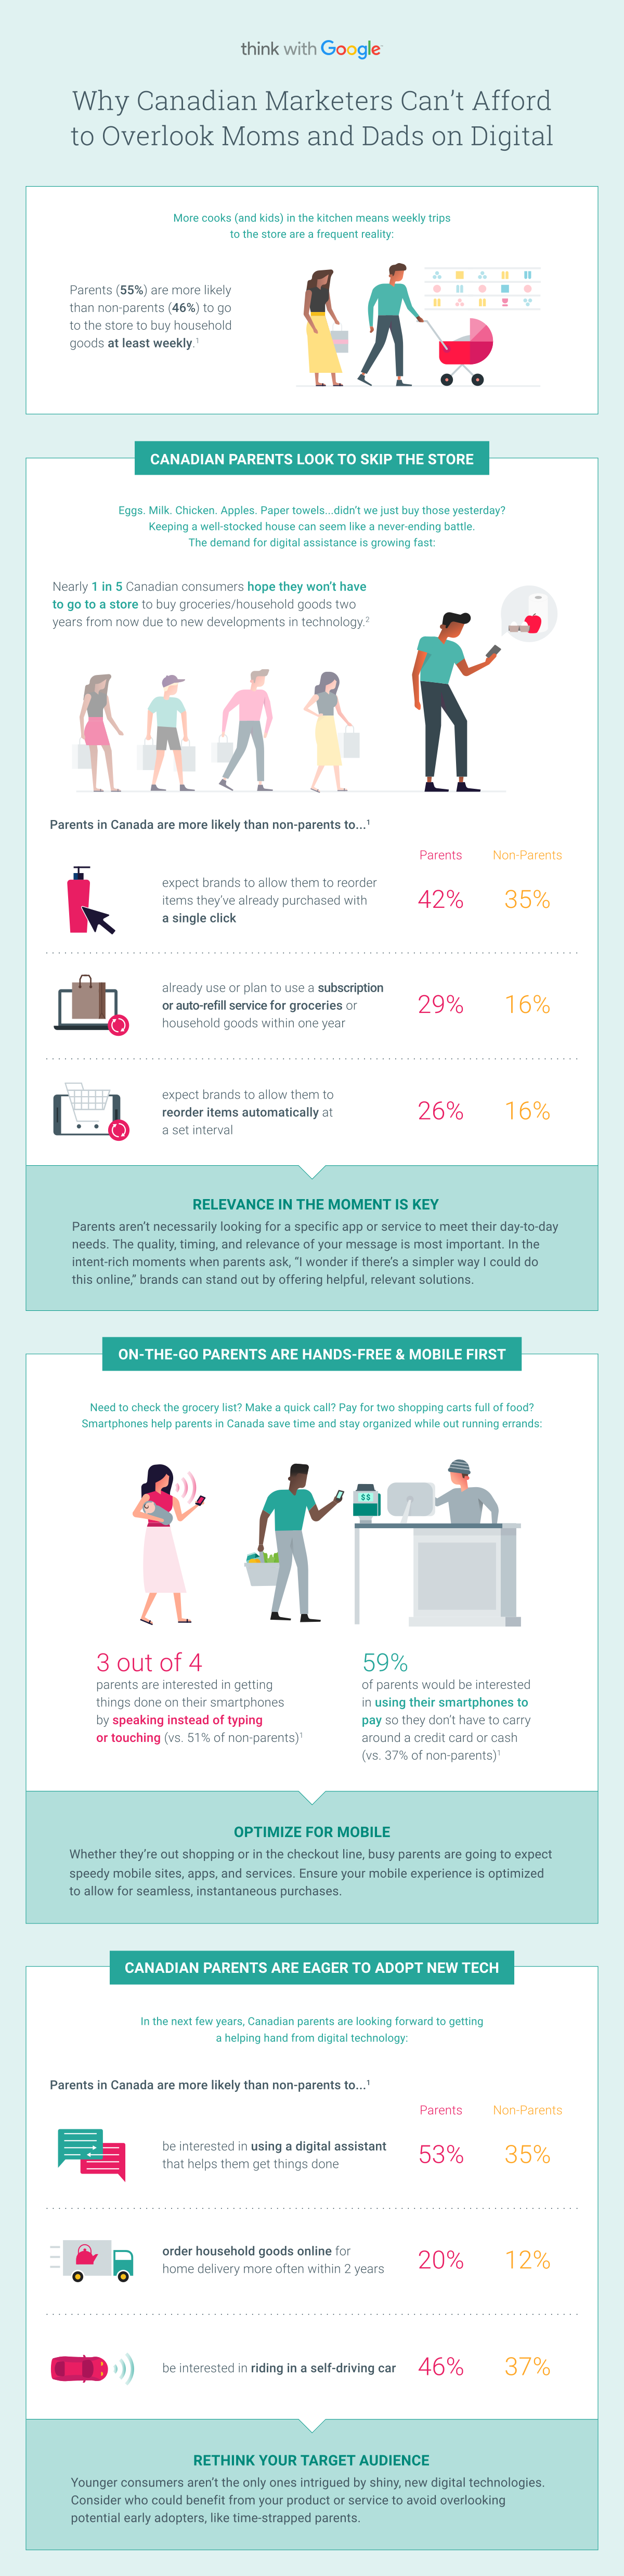 Infographic: Why Canadian marketers Can't afford to Overlook Moms and Dads on Digital - Full text alternative below.